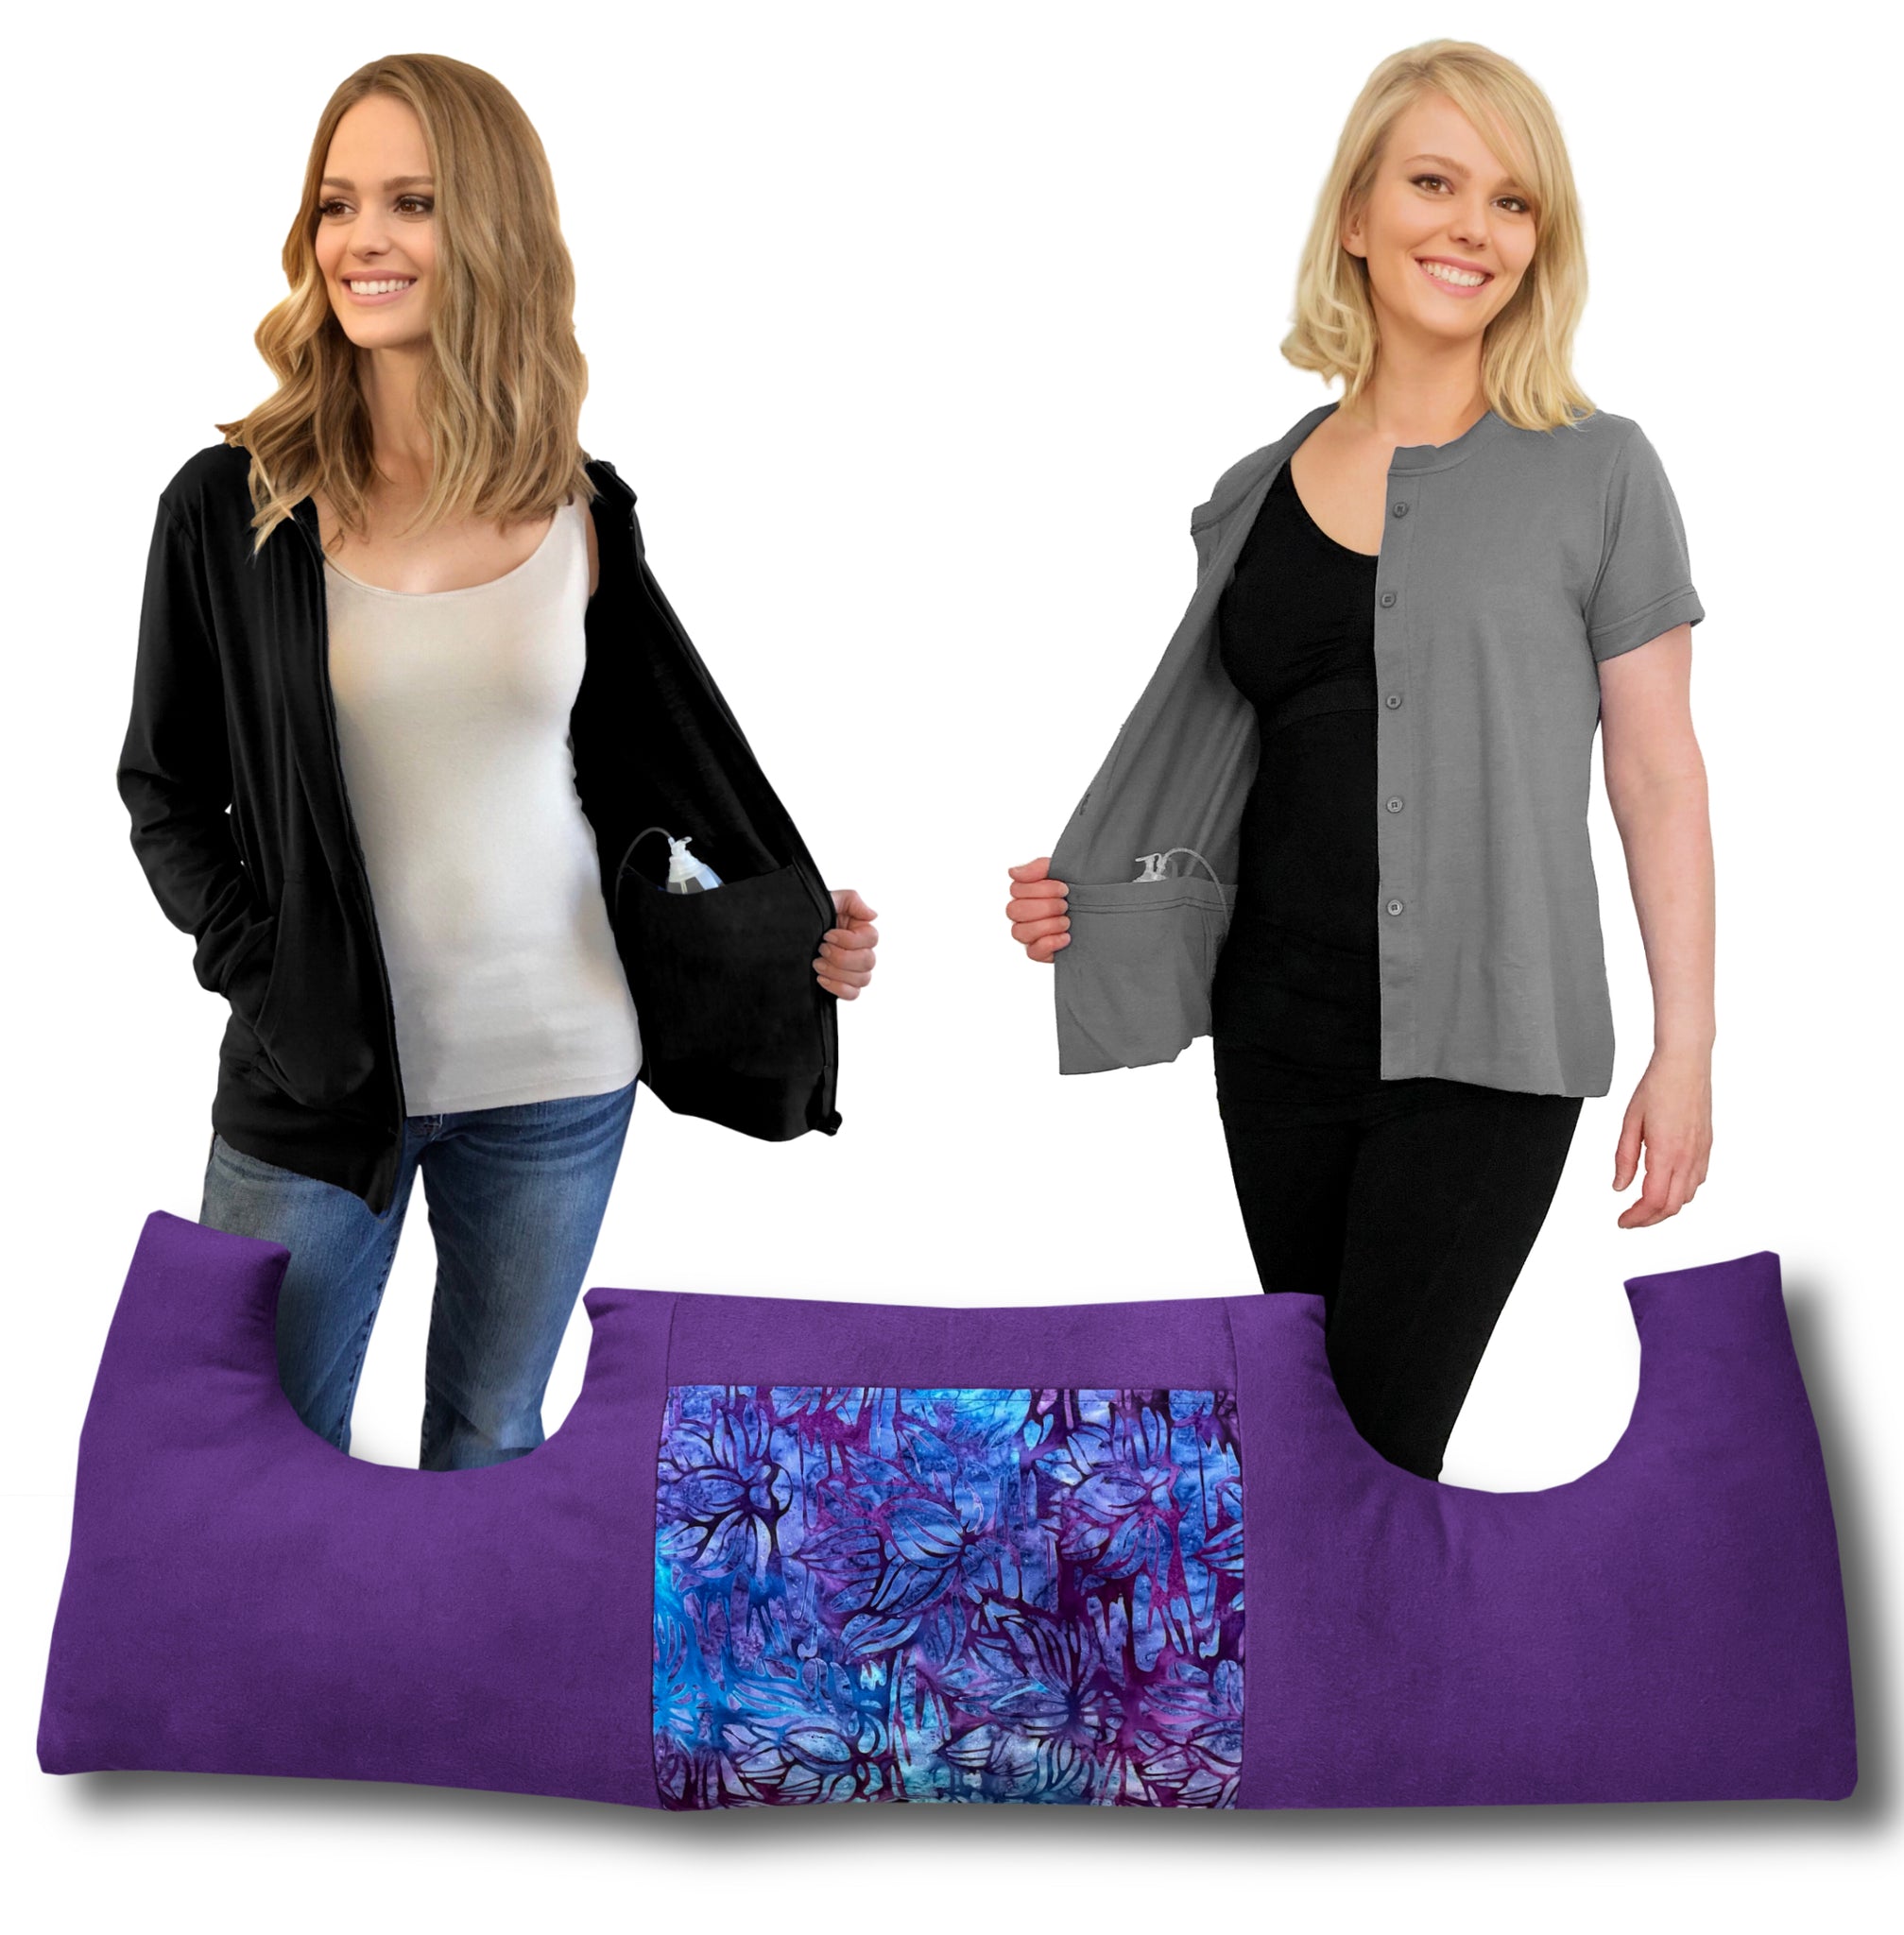 3 Pack MASTECTOMY Kit Must Have SHIRT and Chest PILLOW (Ppp,T1,Hb) 3+ discount included!